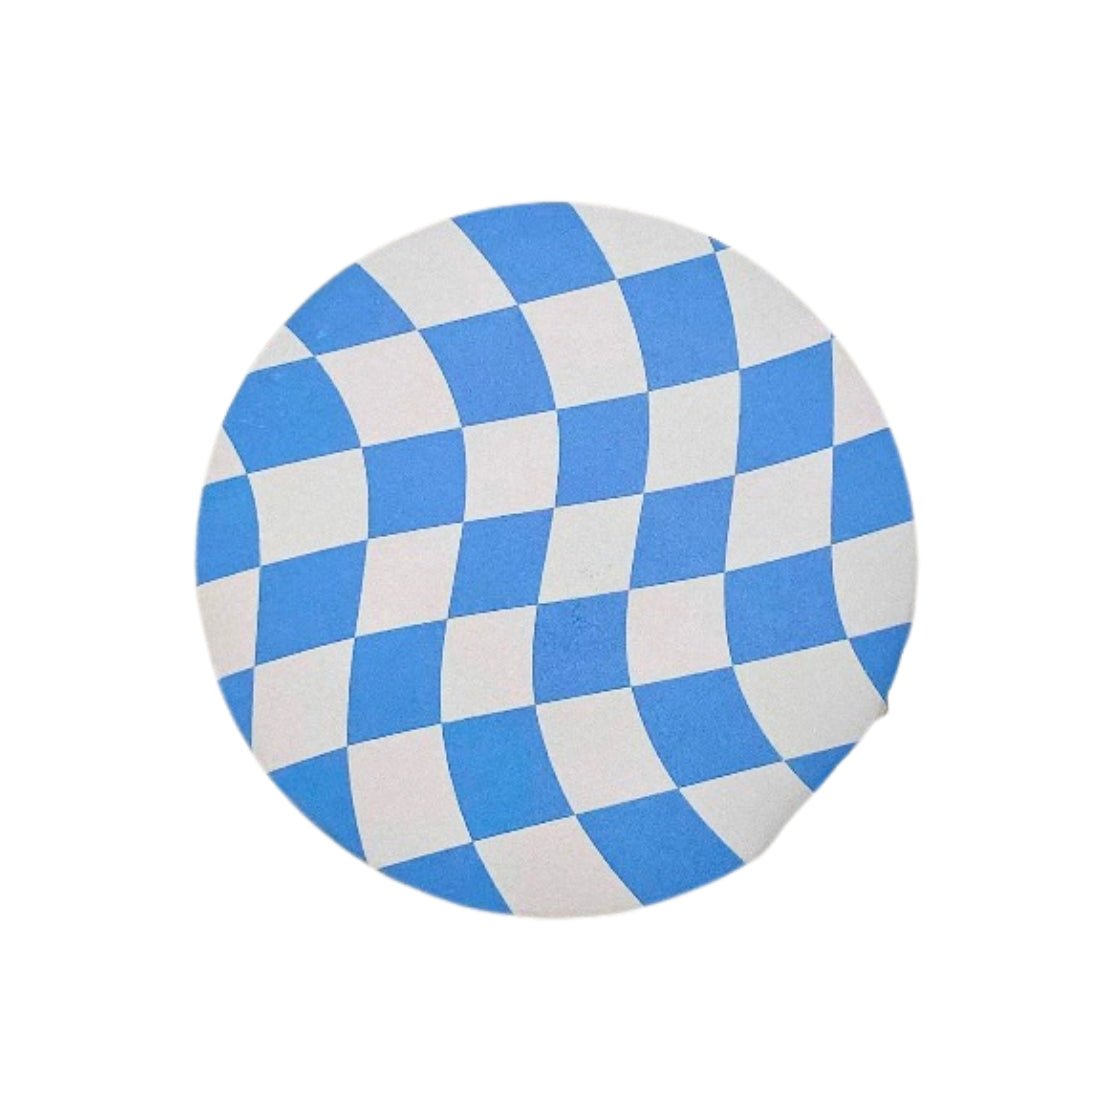 Blue & white checkered pattern round cup coaster